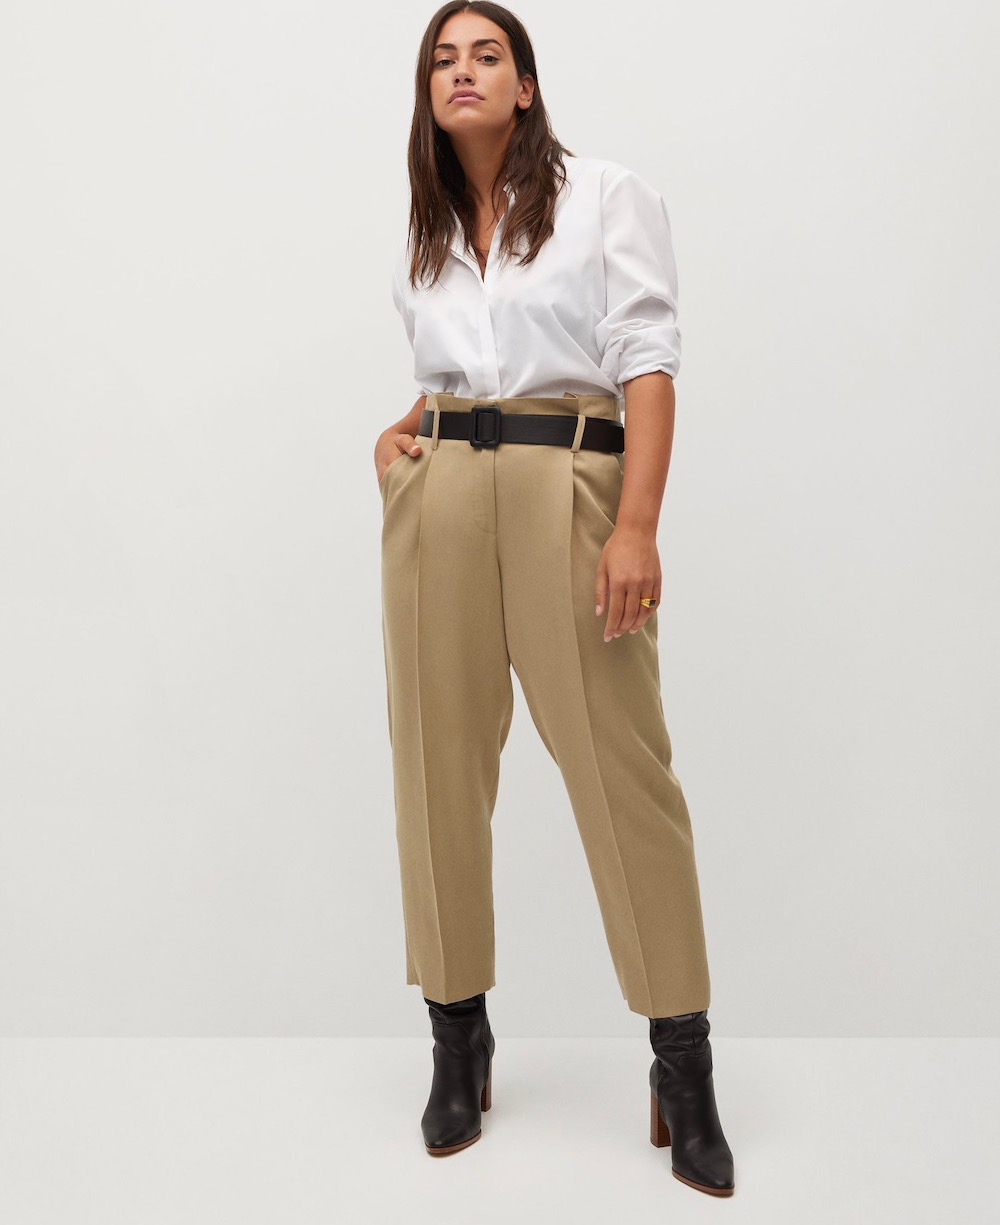 Fashionable Khakis You Can Wear Now Through Spring - theFashionSpot